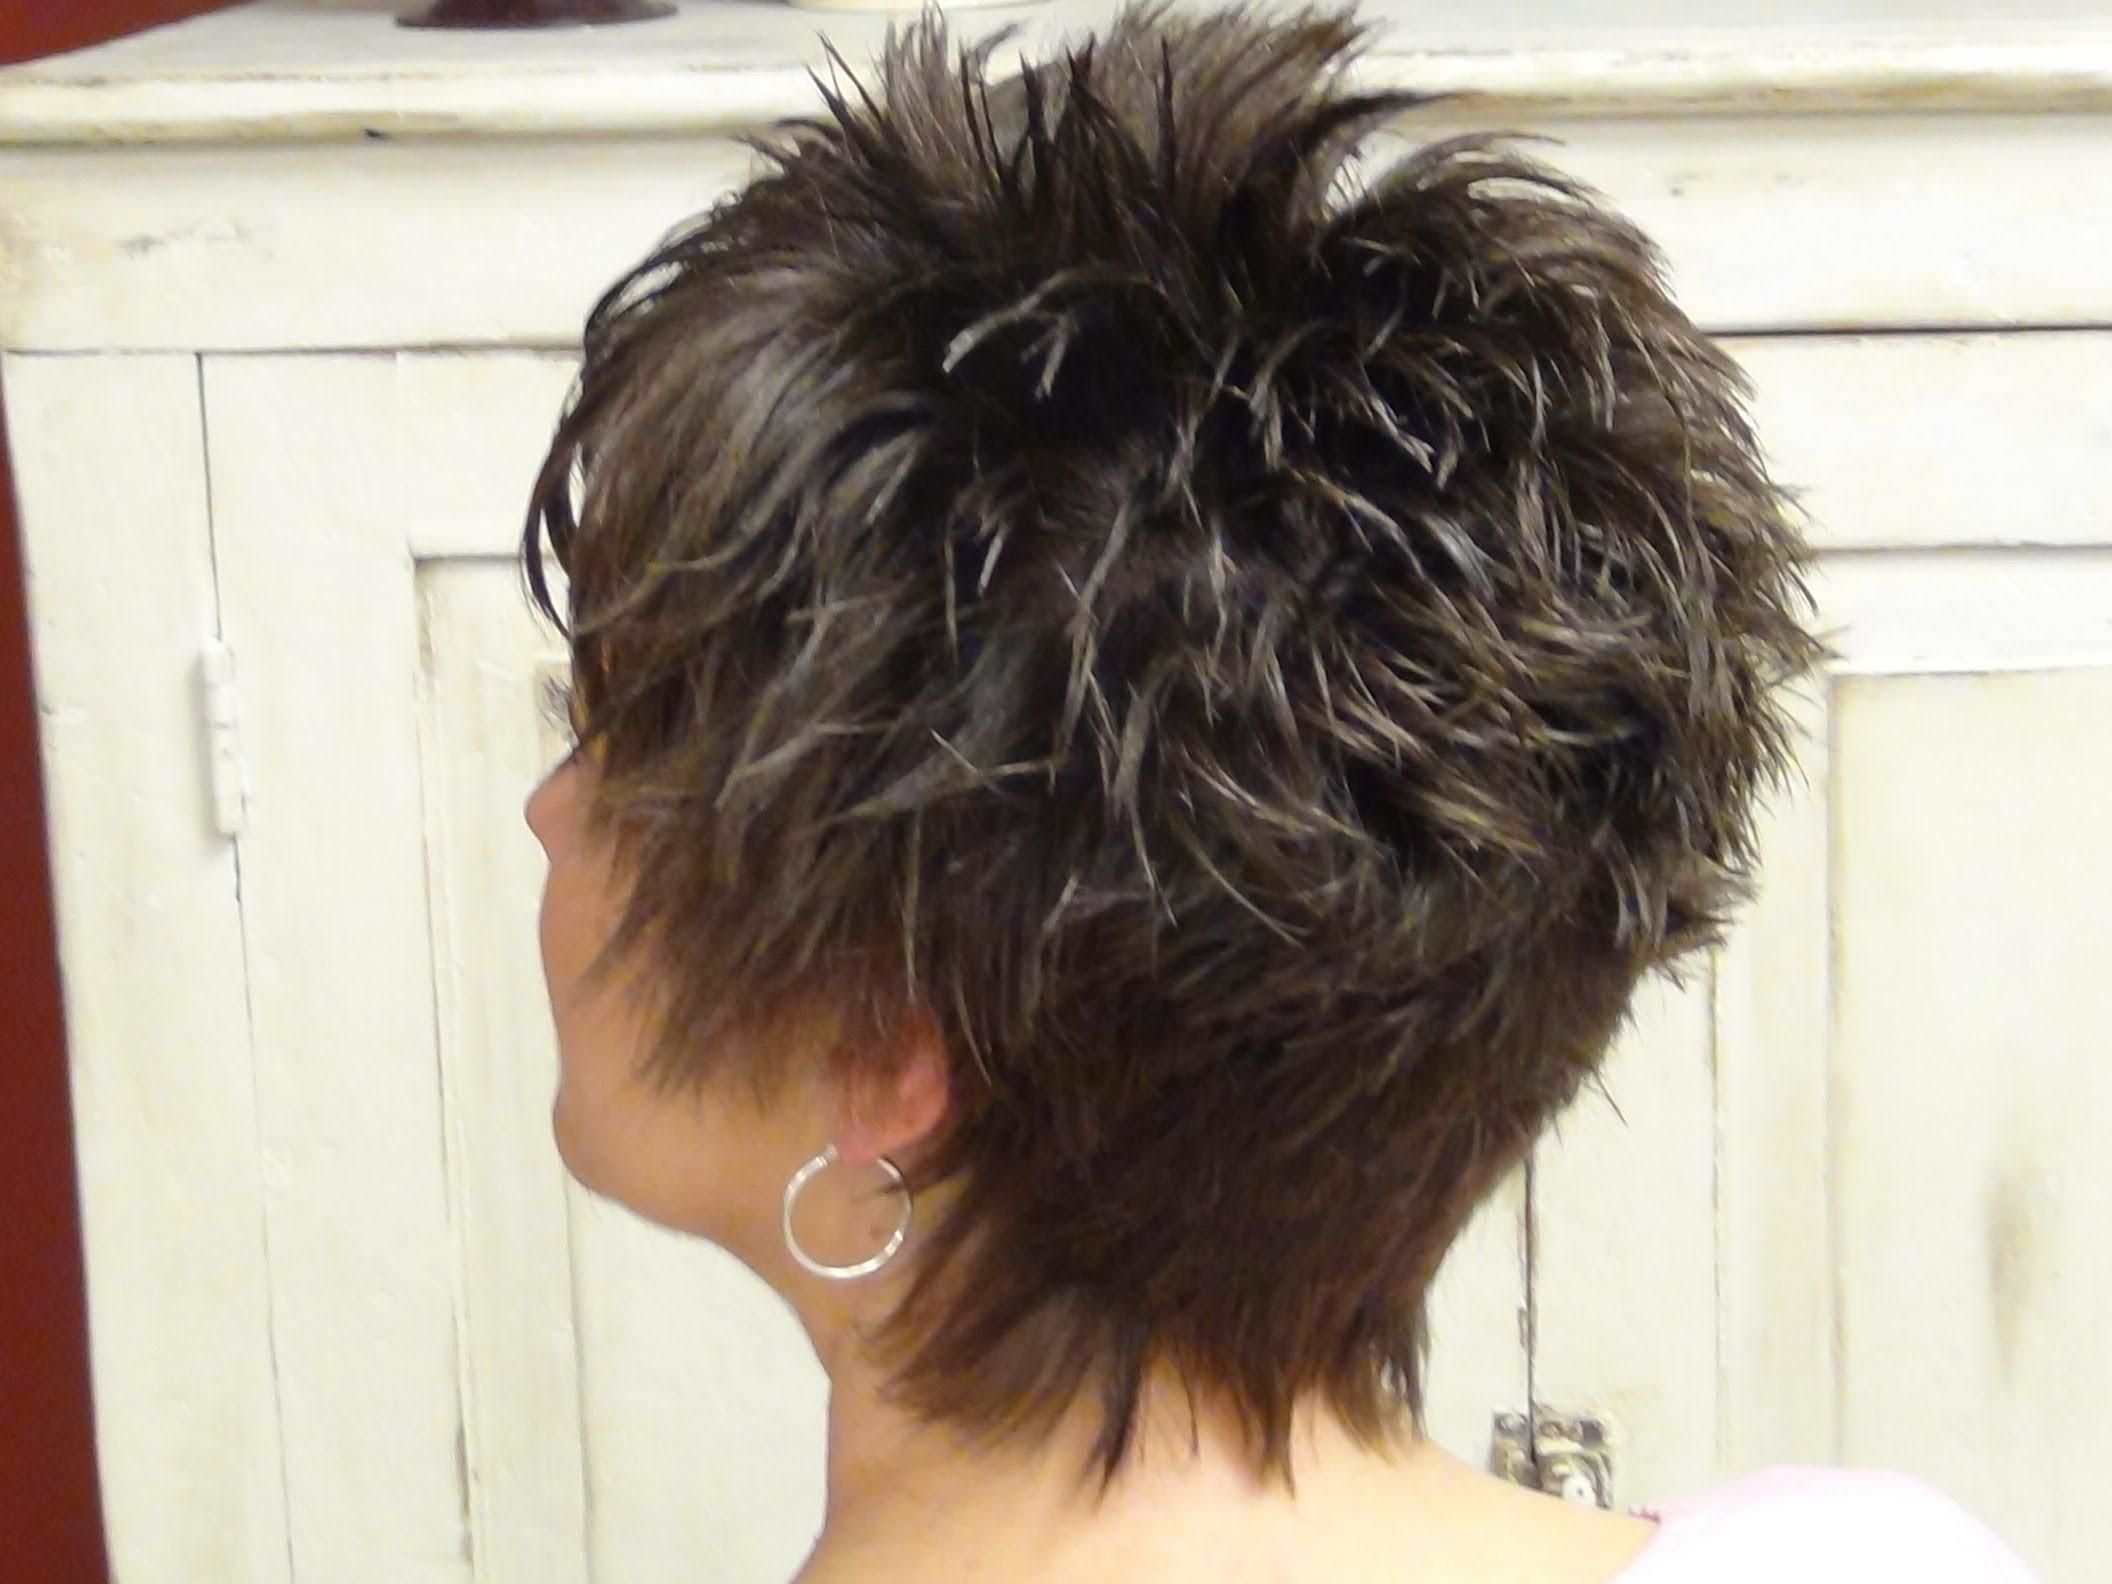 Back View Of Short Pixie Hairstyles – Hairstyle For Women & Man Intended For Current Pixie Hairstyles With Stacked Back (View 5 of 15)